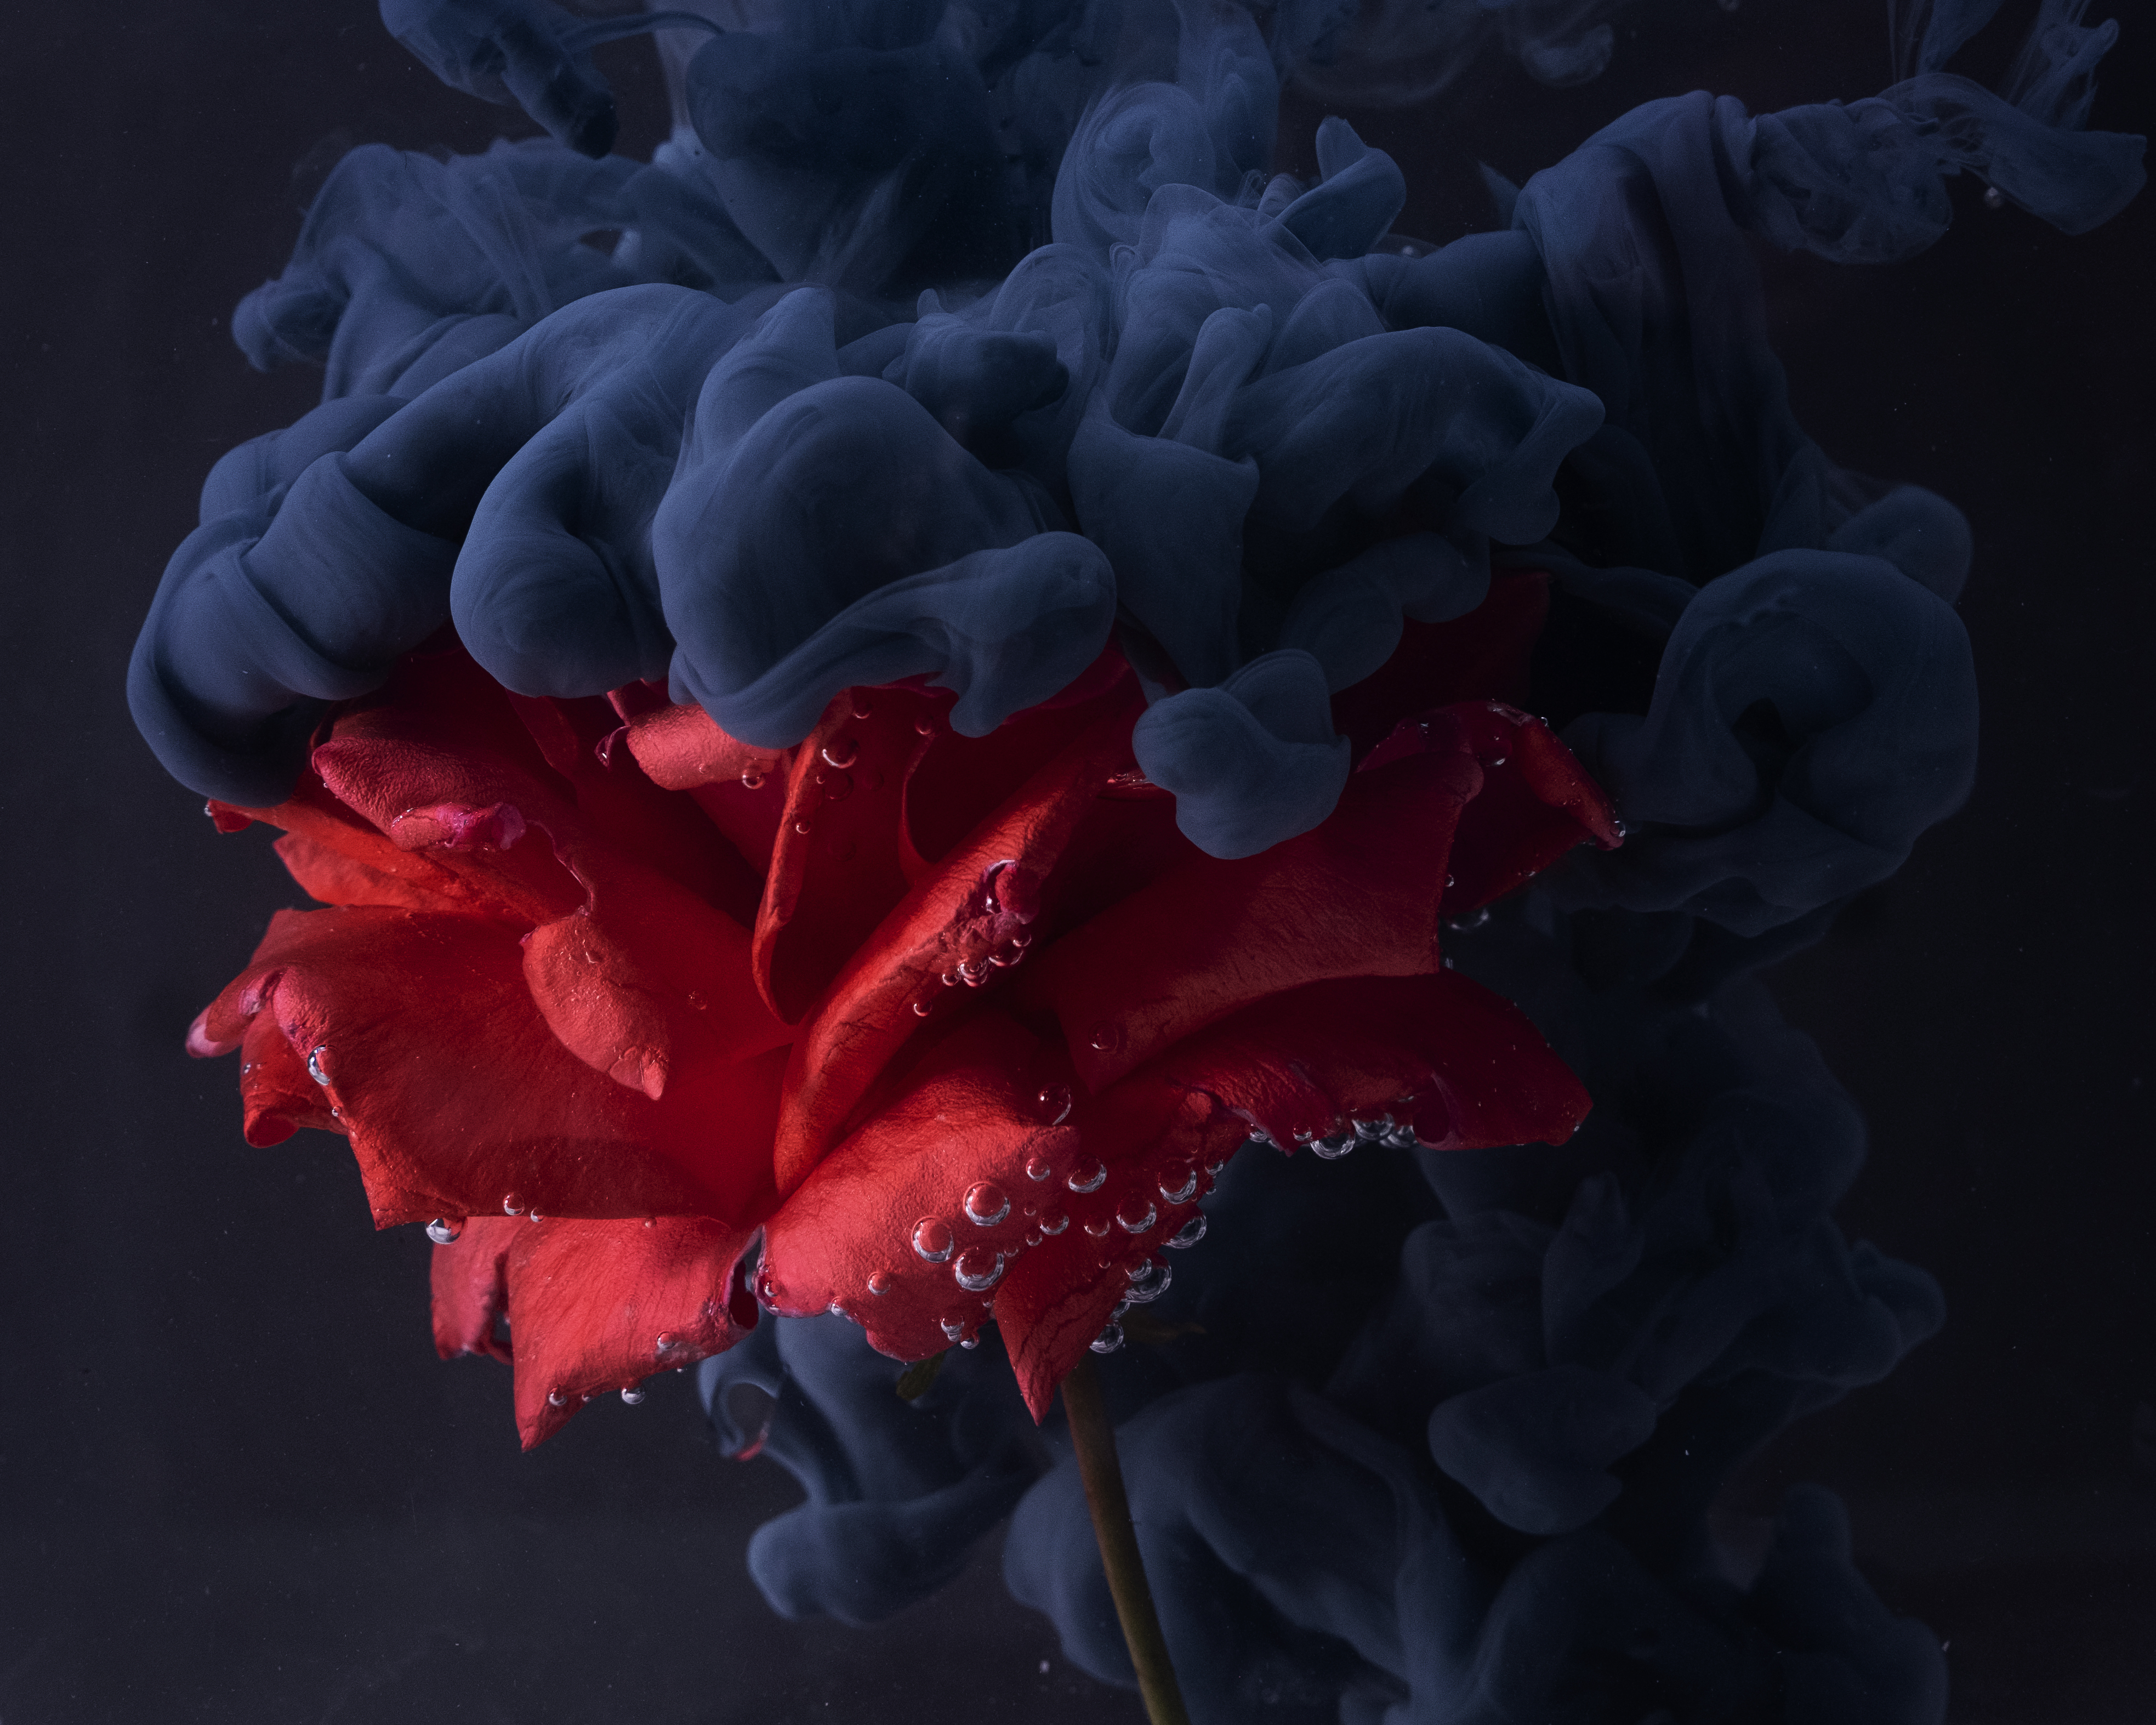 Tarryn Goldman Photography - Paint and flowers AFTER EDITING